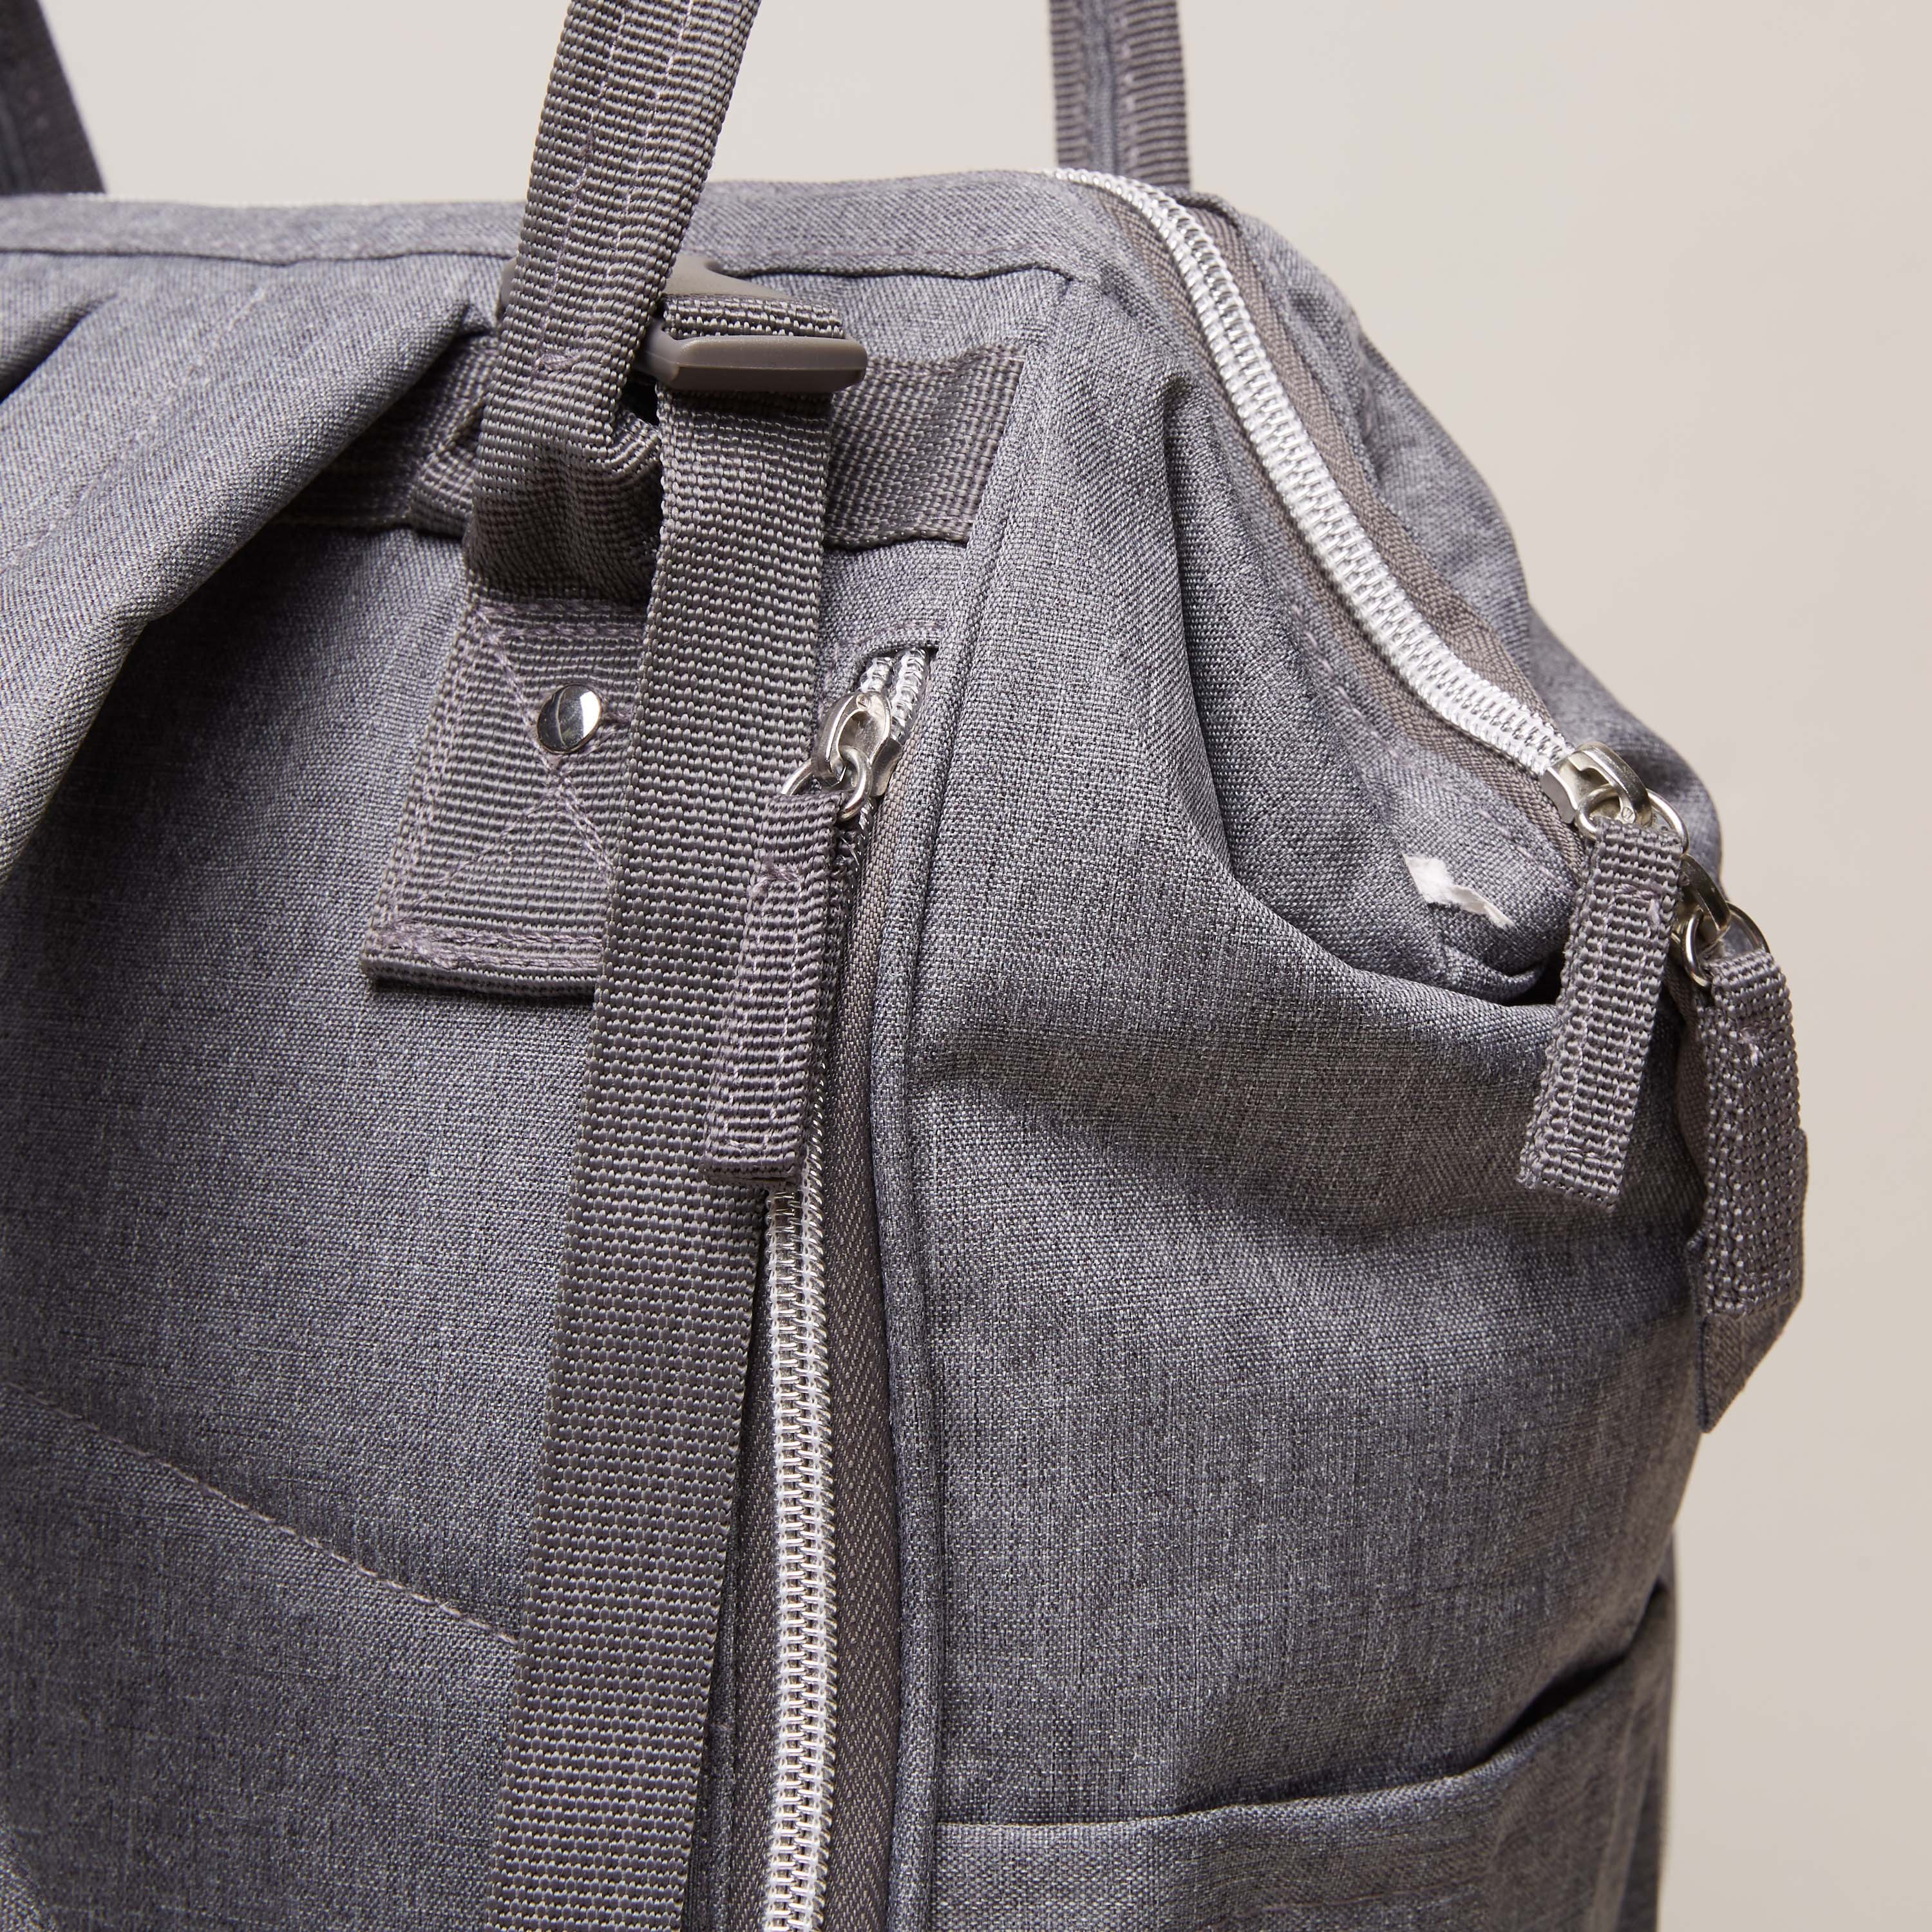 Bags That Get It - Work Bags & Travel Bags